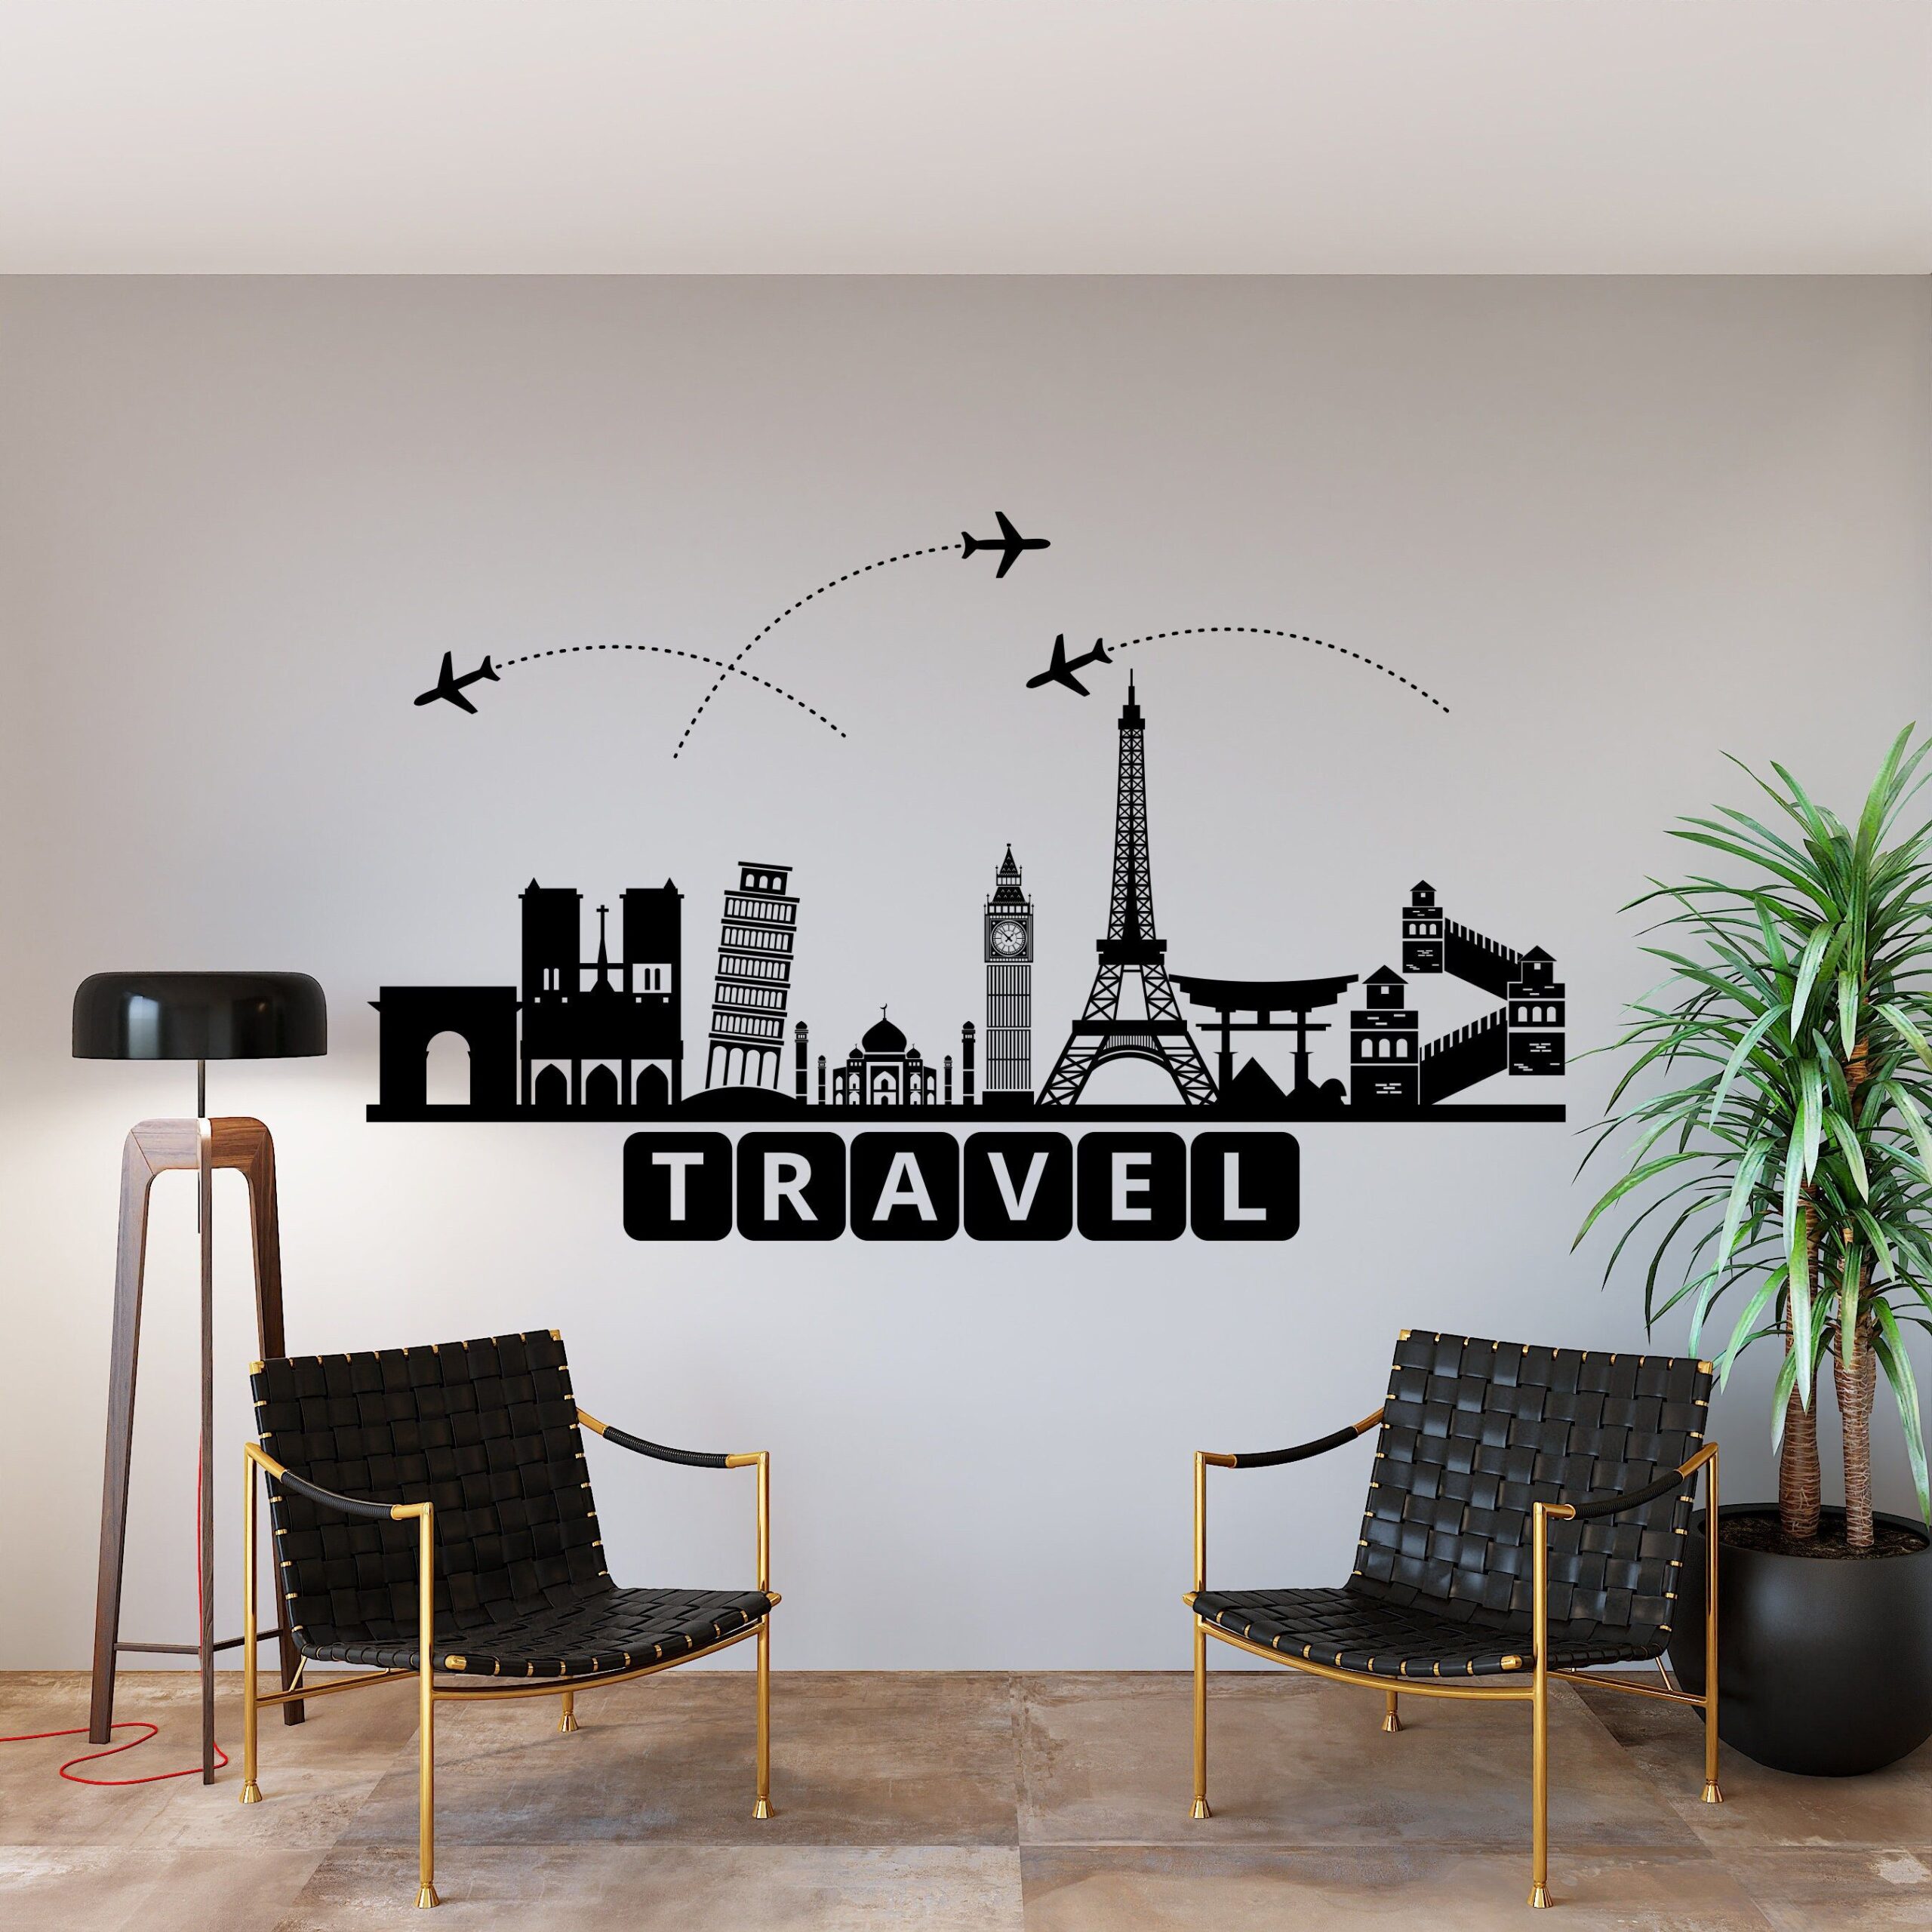 Unique Ways to Customize Your Space with Vinyl Wall Decals